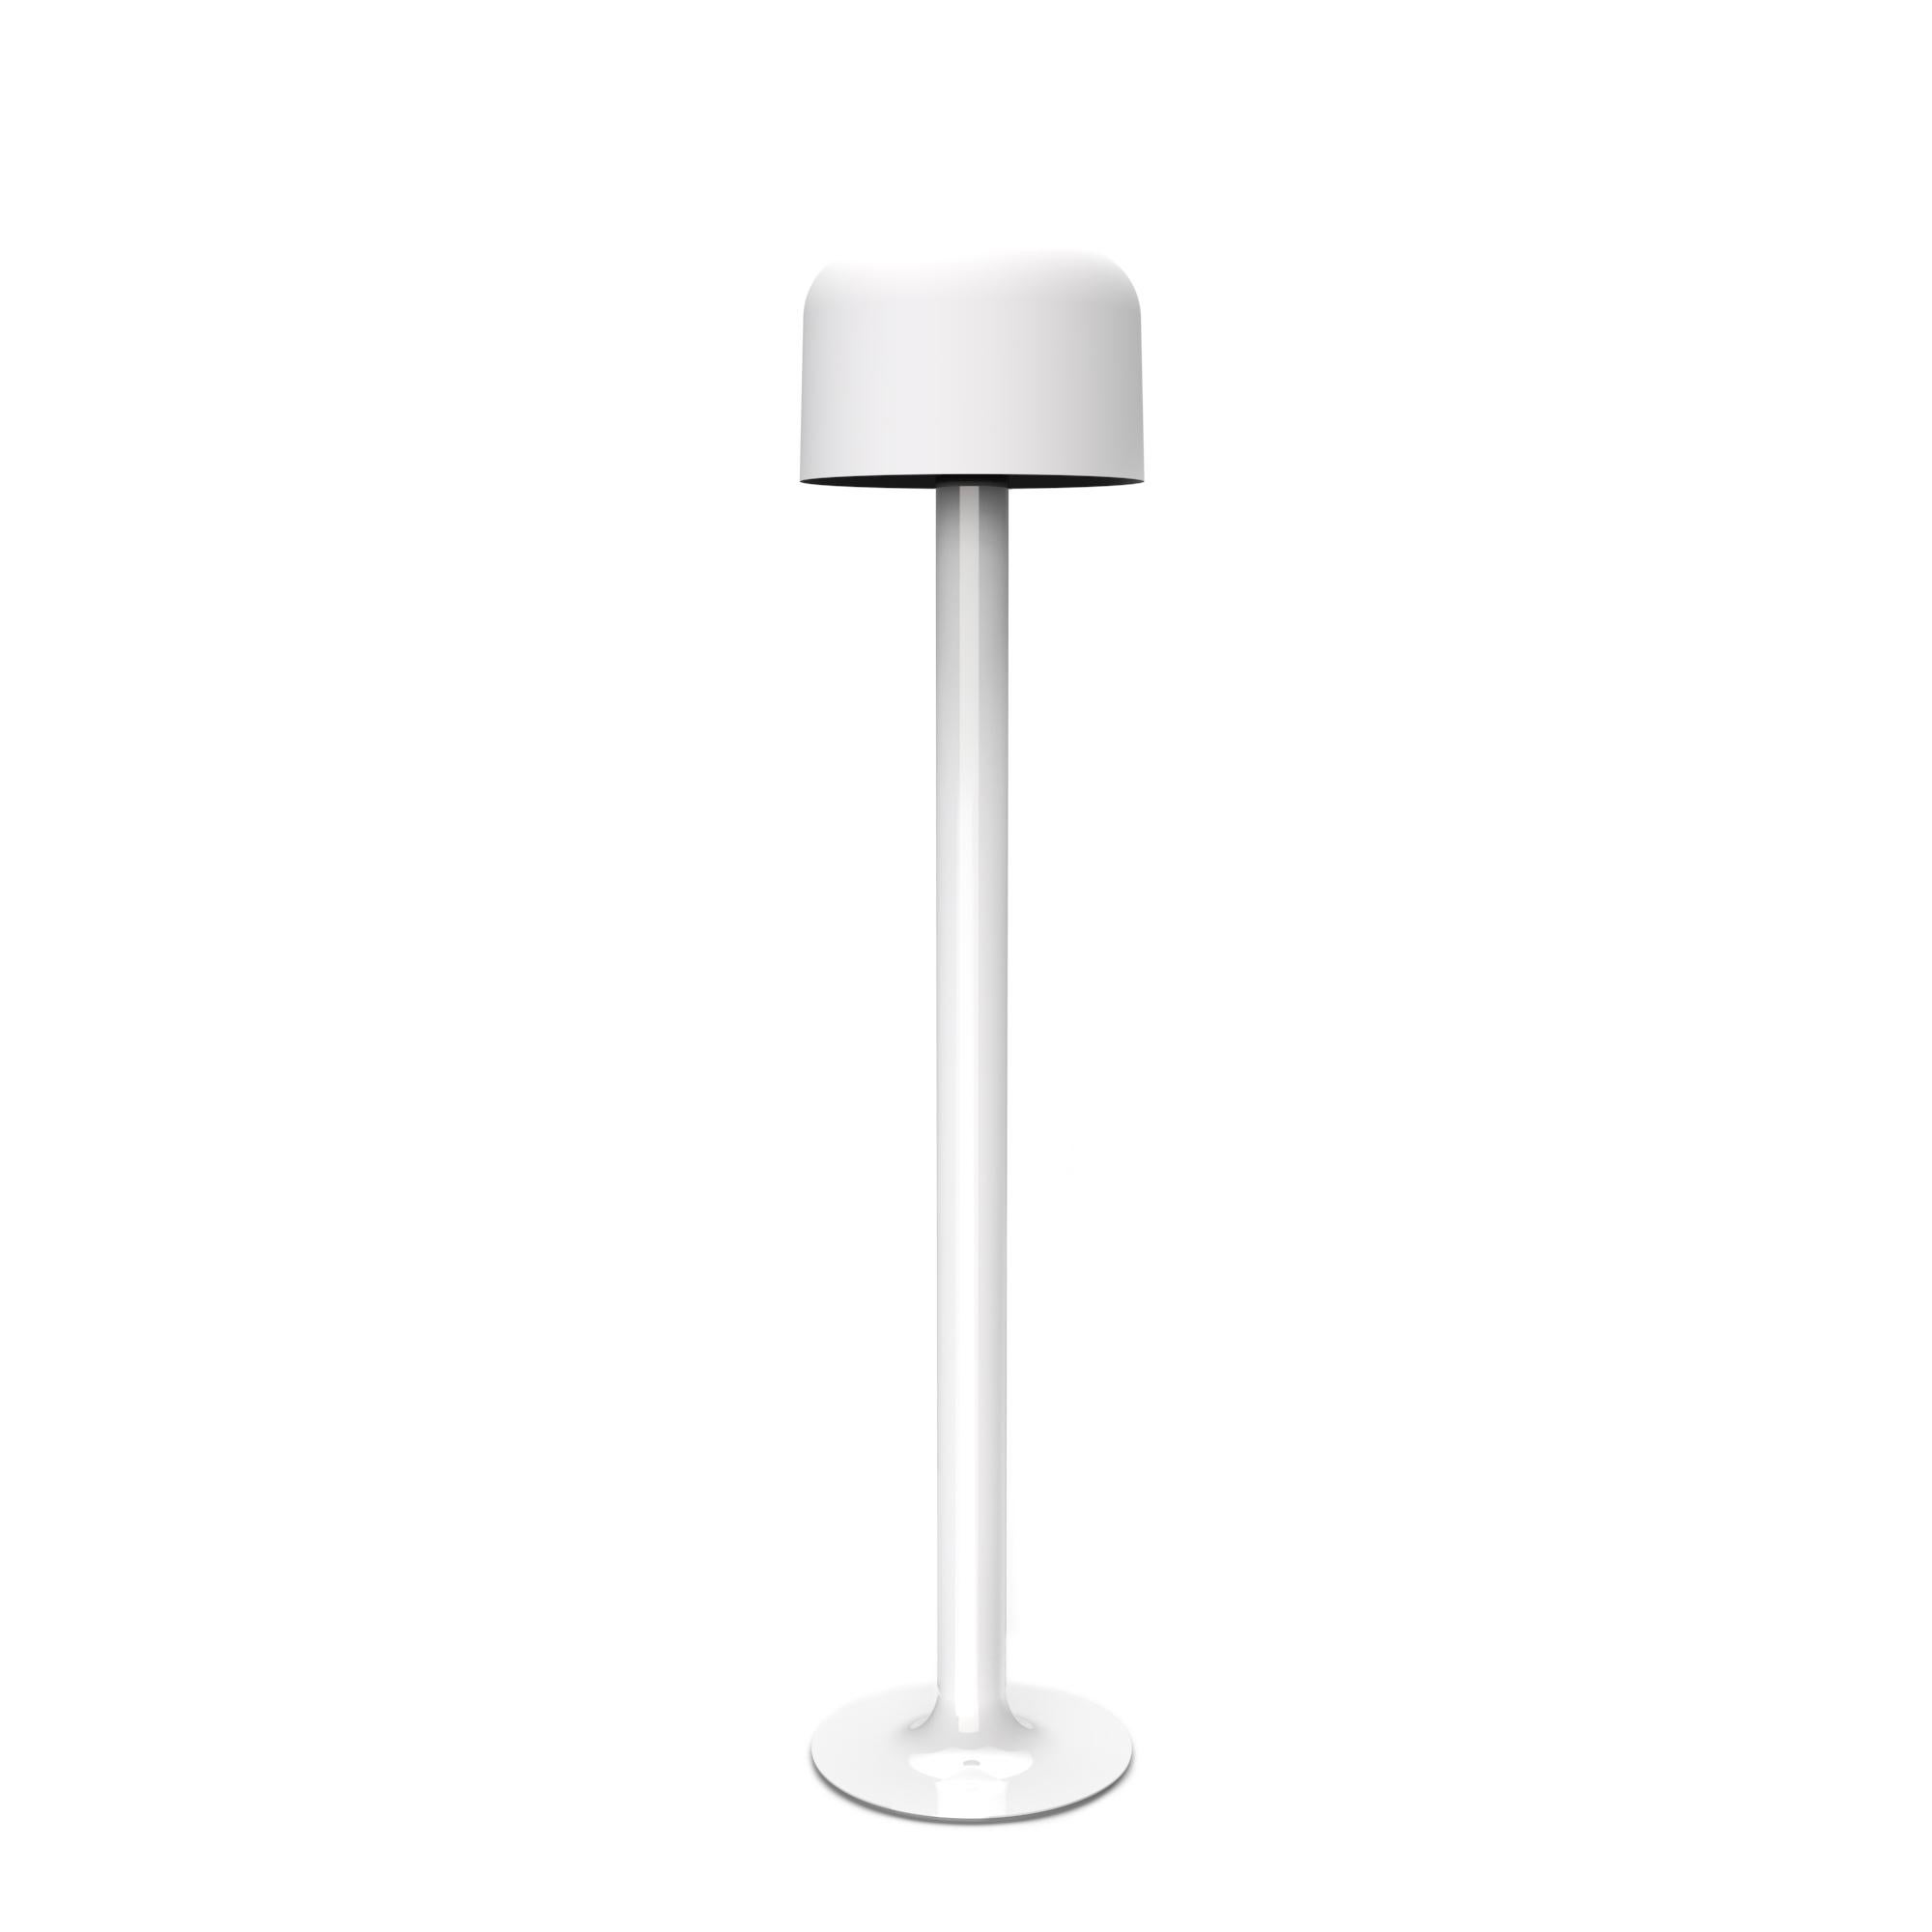 Michel Mortier 10527 metal and glass floor lamp for Disderot in white.

Originally designed in 1972, this sculptural floor lamp is a newly produced numbered edition with an authentication certificate. Made in France by Disderot with many of the same